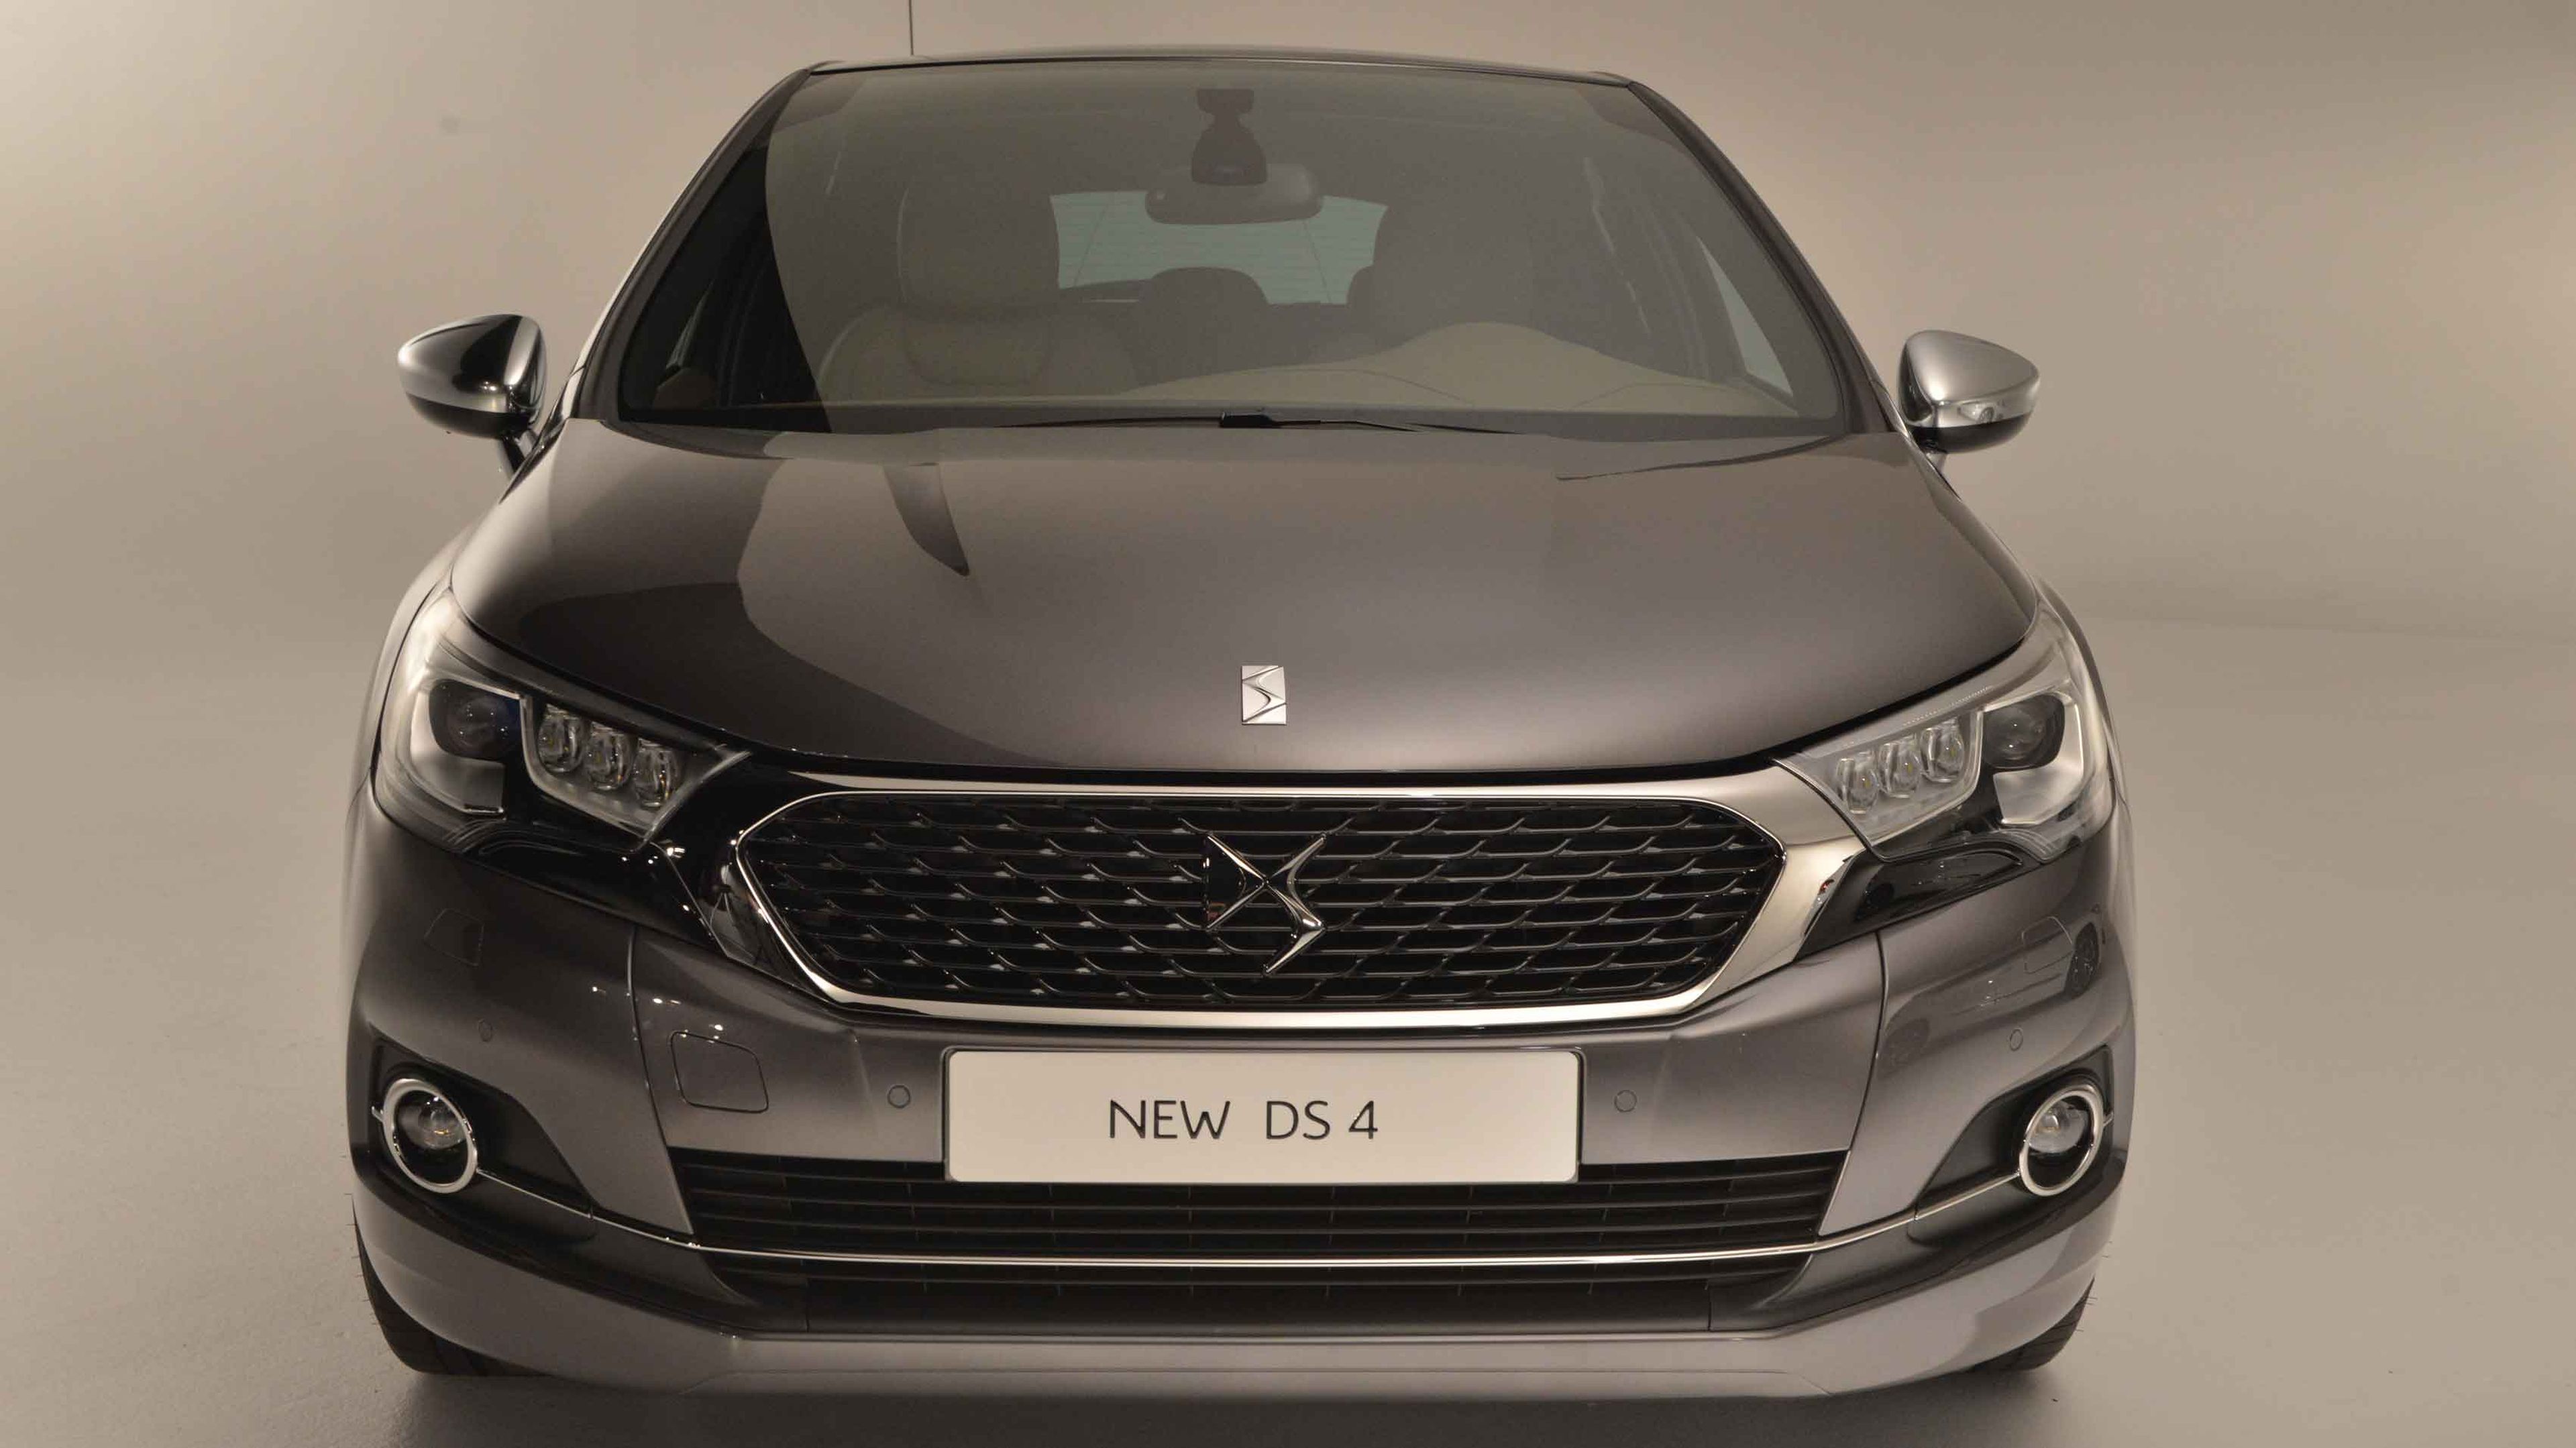 nuevo DS4 2015 frontal